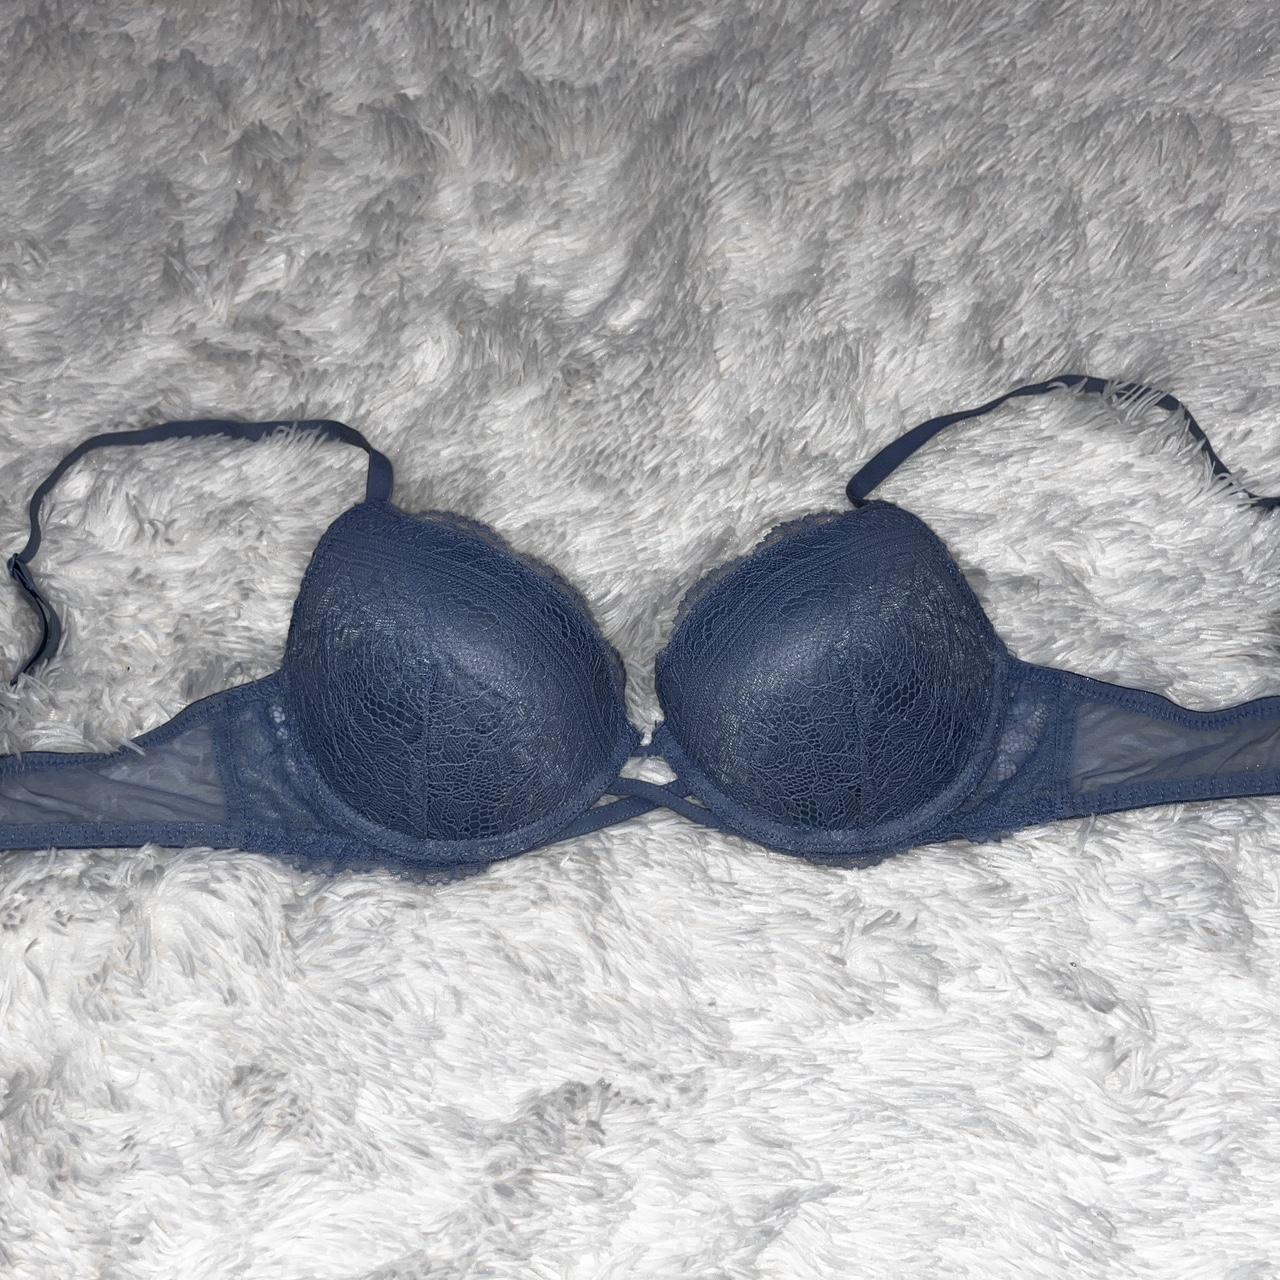 Gorgeous embroidered lace push up bra from - Depop